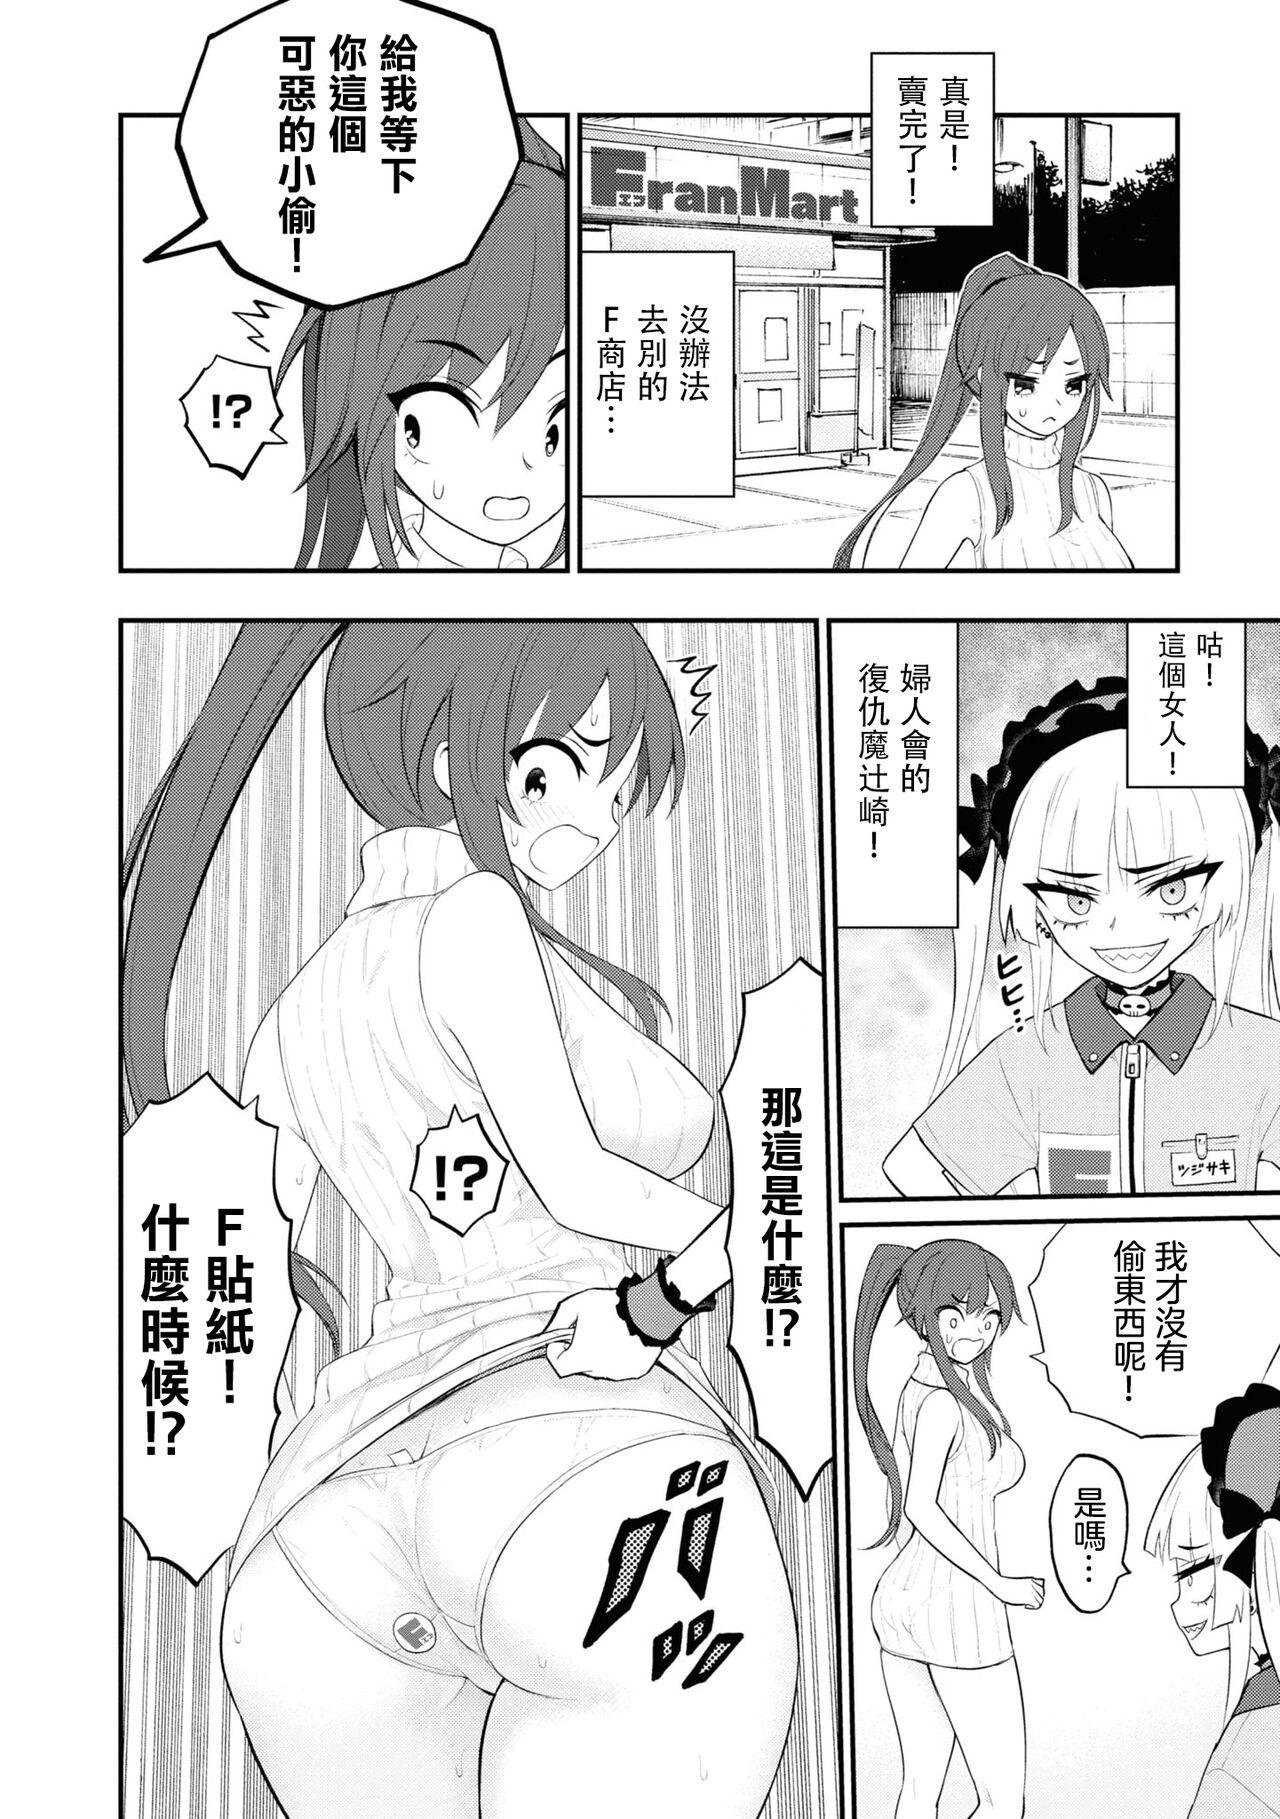 Relax 淫獄小區 15-17話 Buttfucking - Page 4